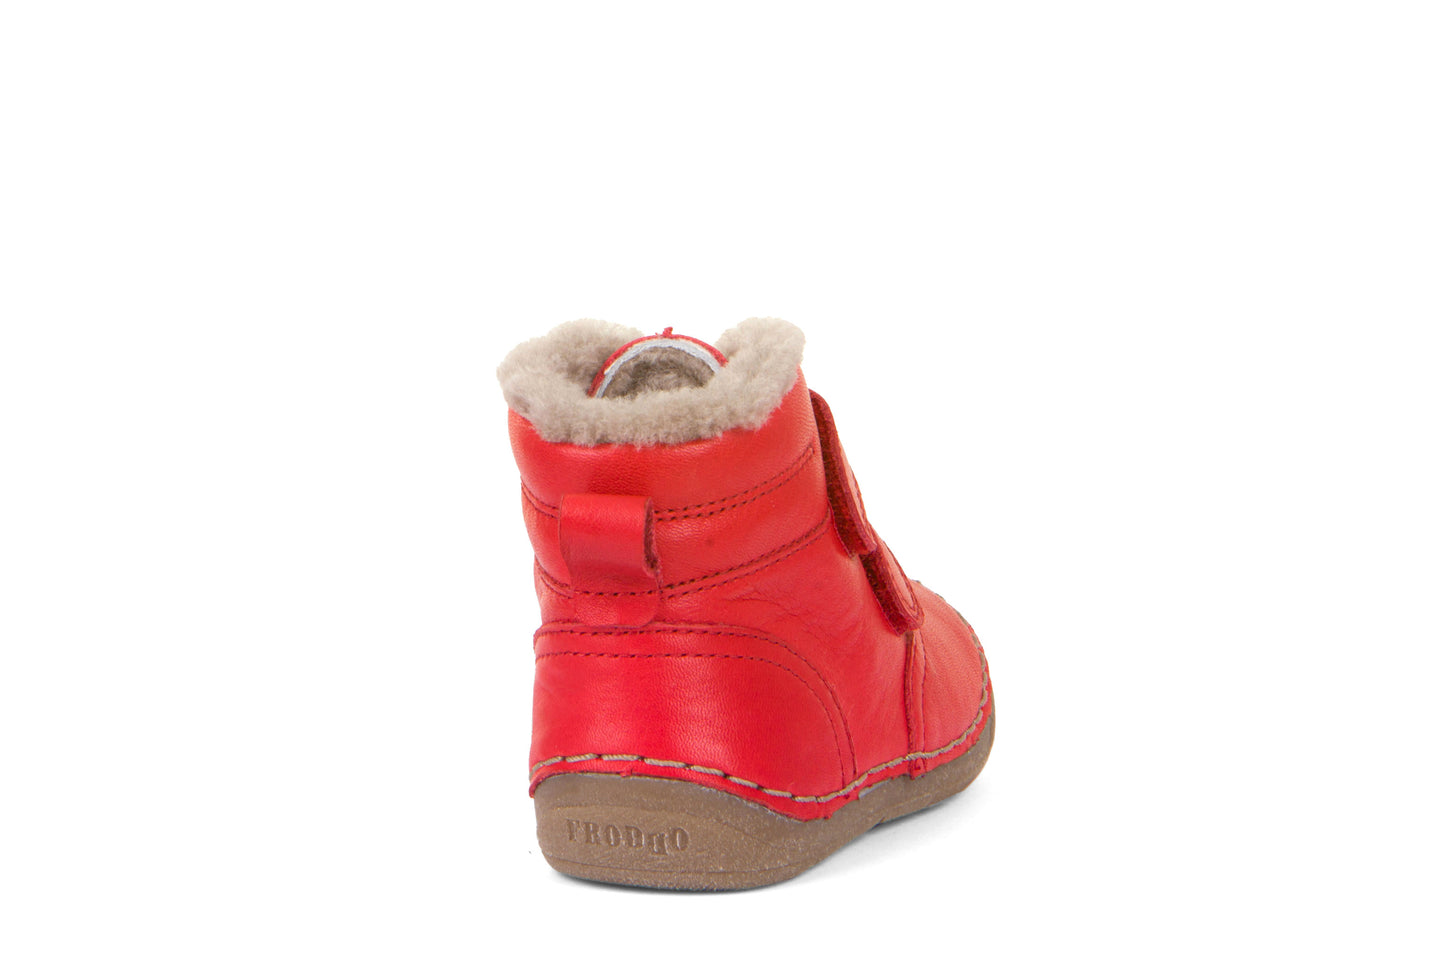 A unisex sheepskin lined boot by Froddo, style Paix Winter G2110113-11 in Red. Back view.